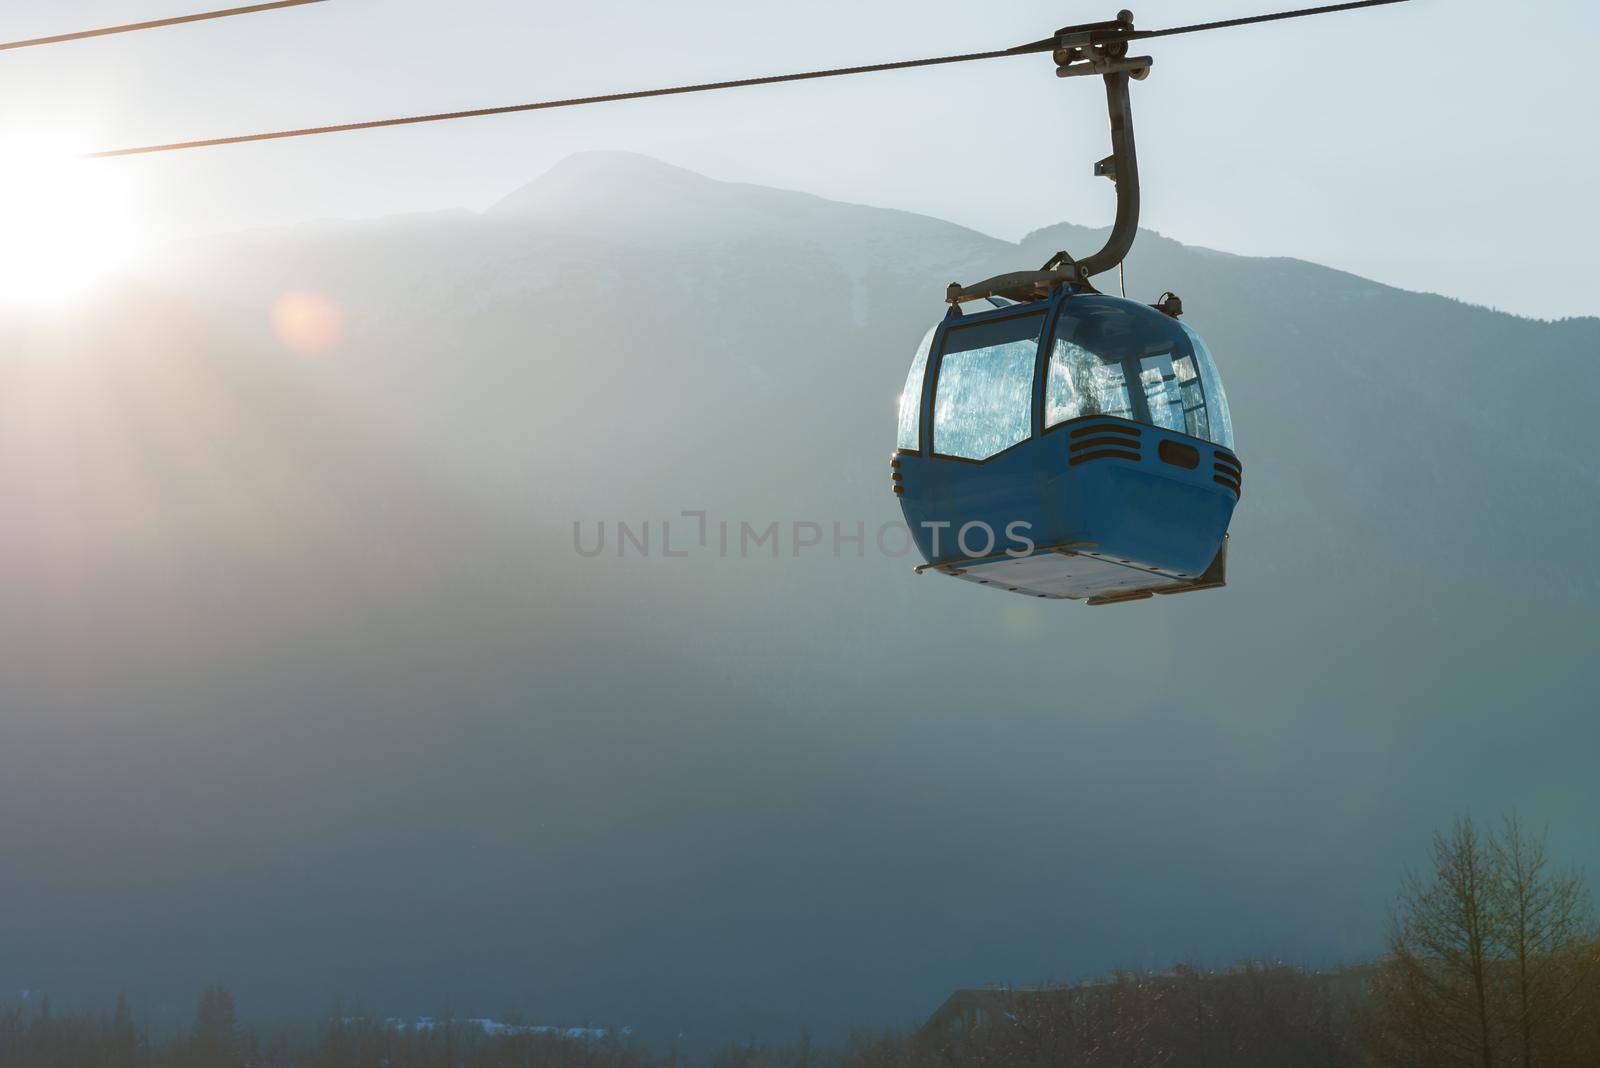 Ropeway and cable car transport system for skiers in sunset